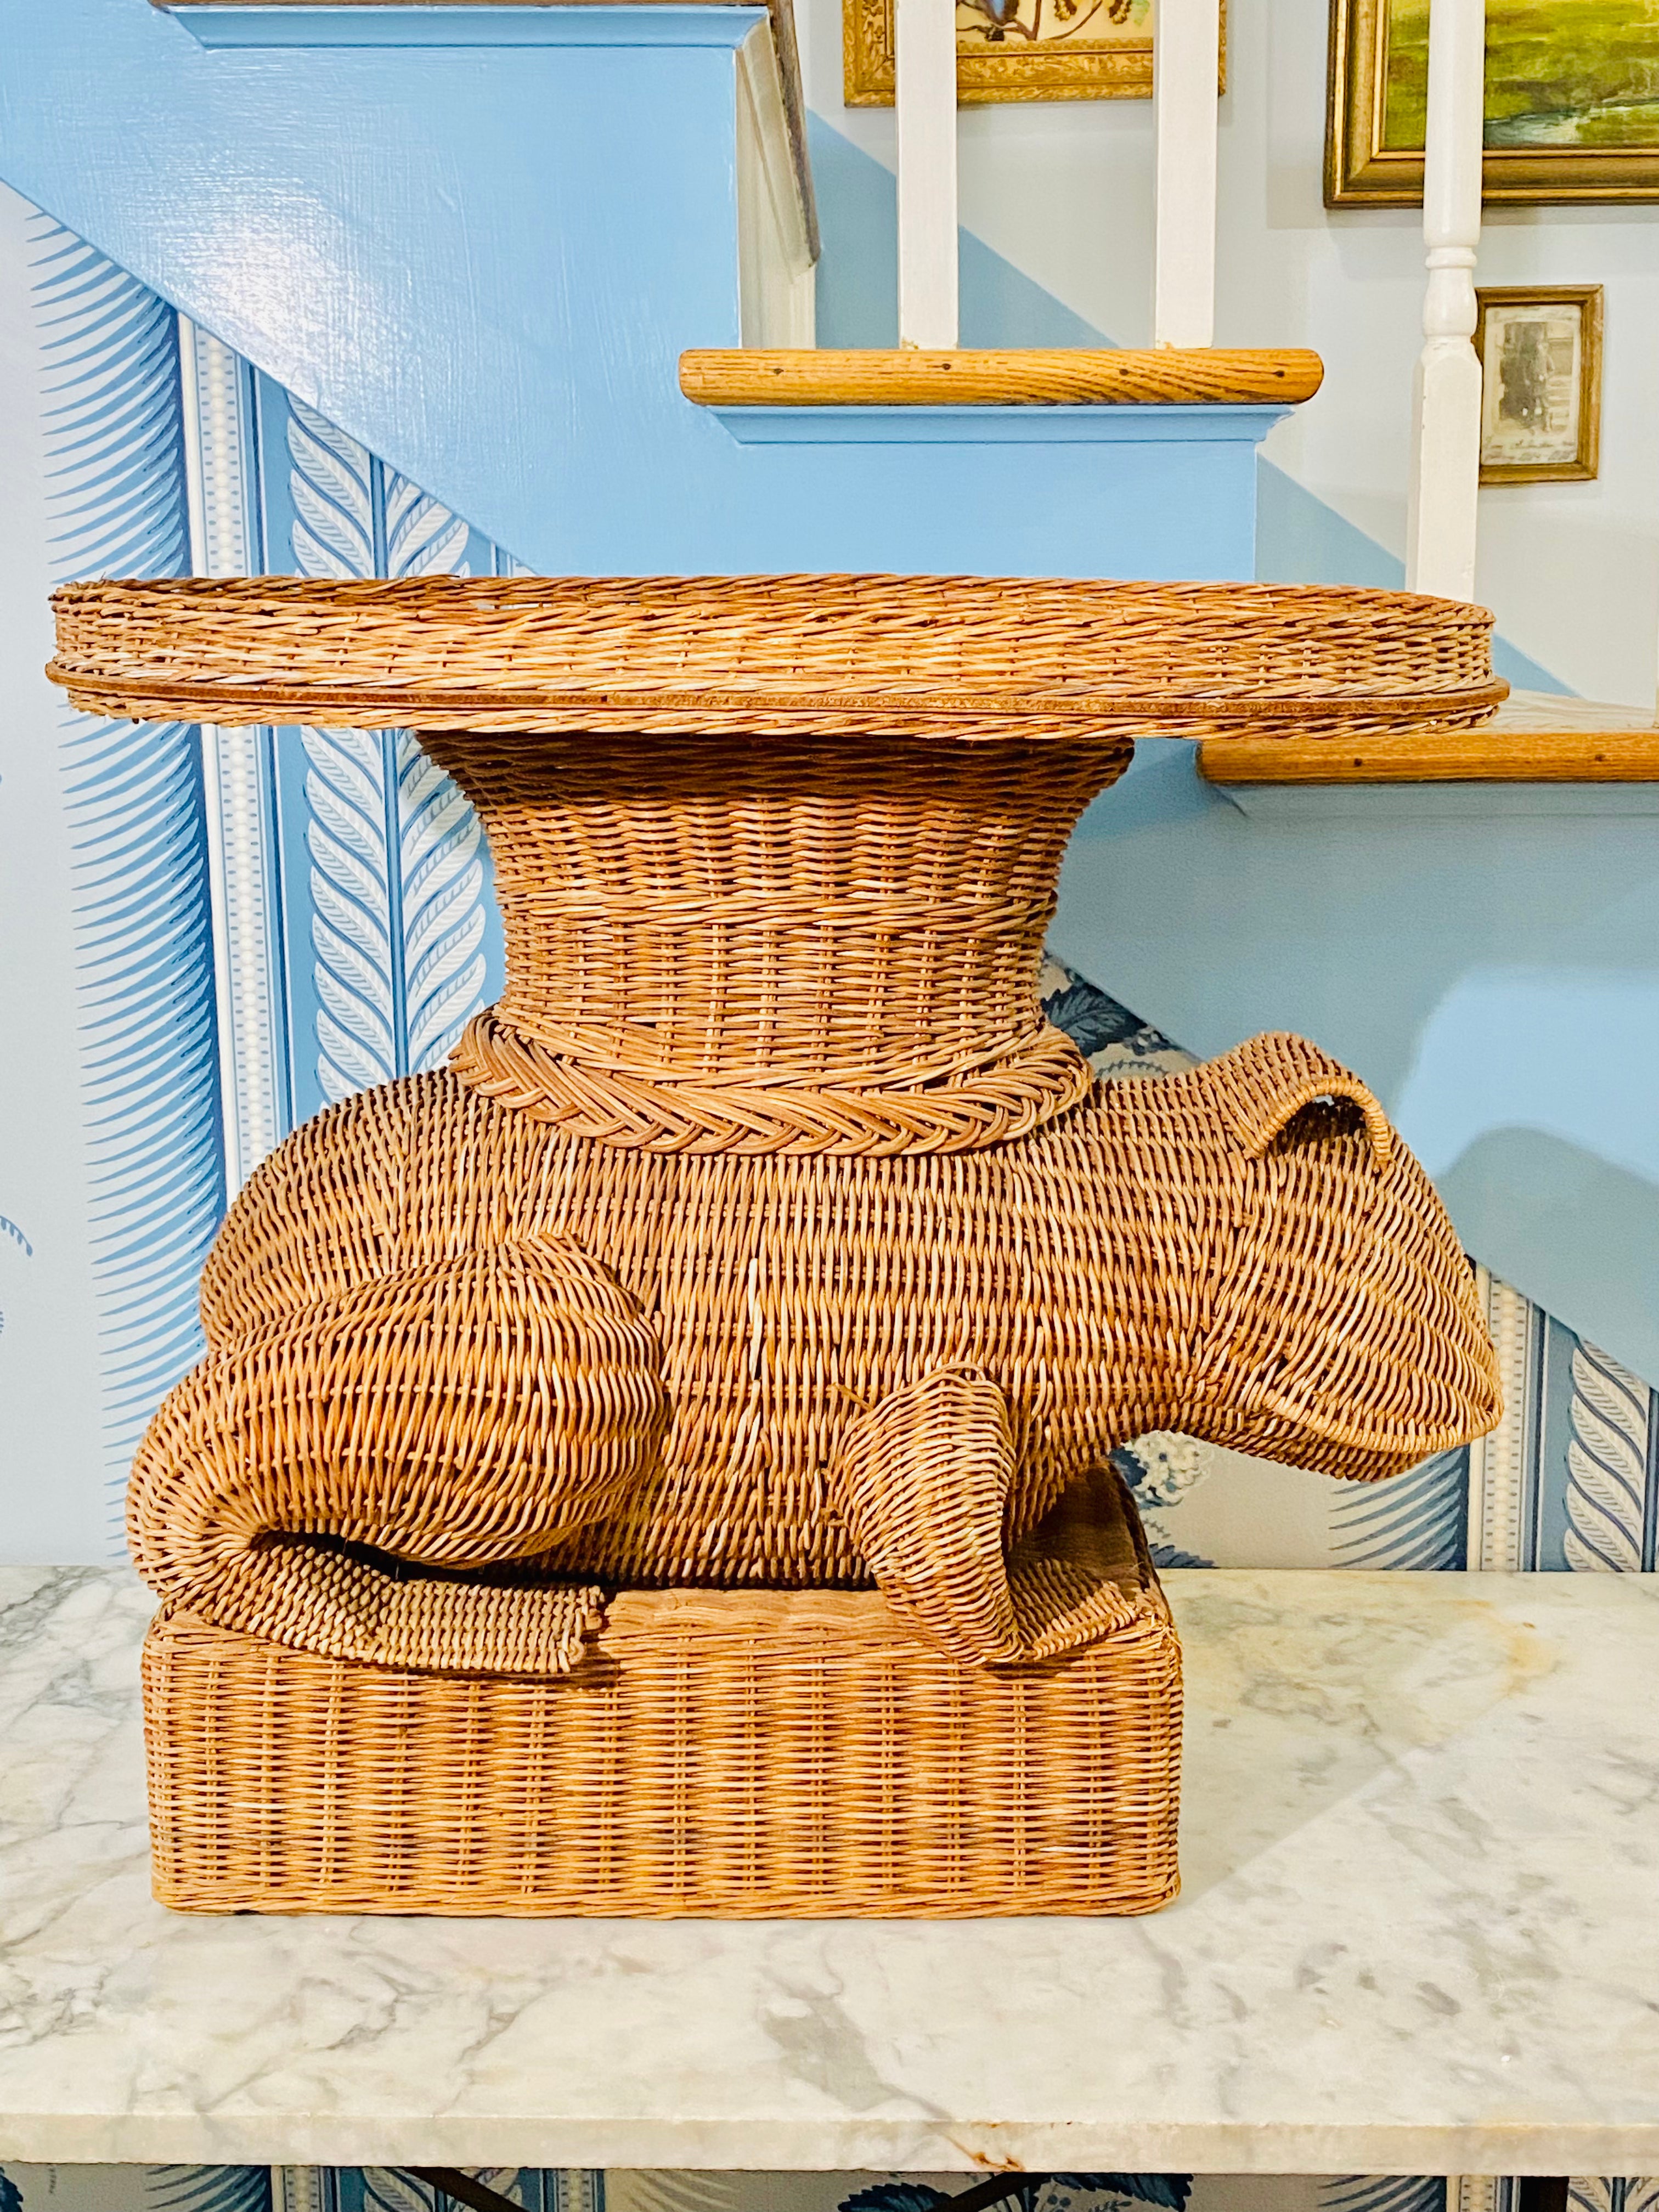 Incredibly Rare Wicker Frog Tray Table